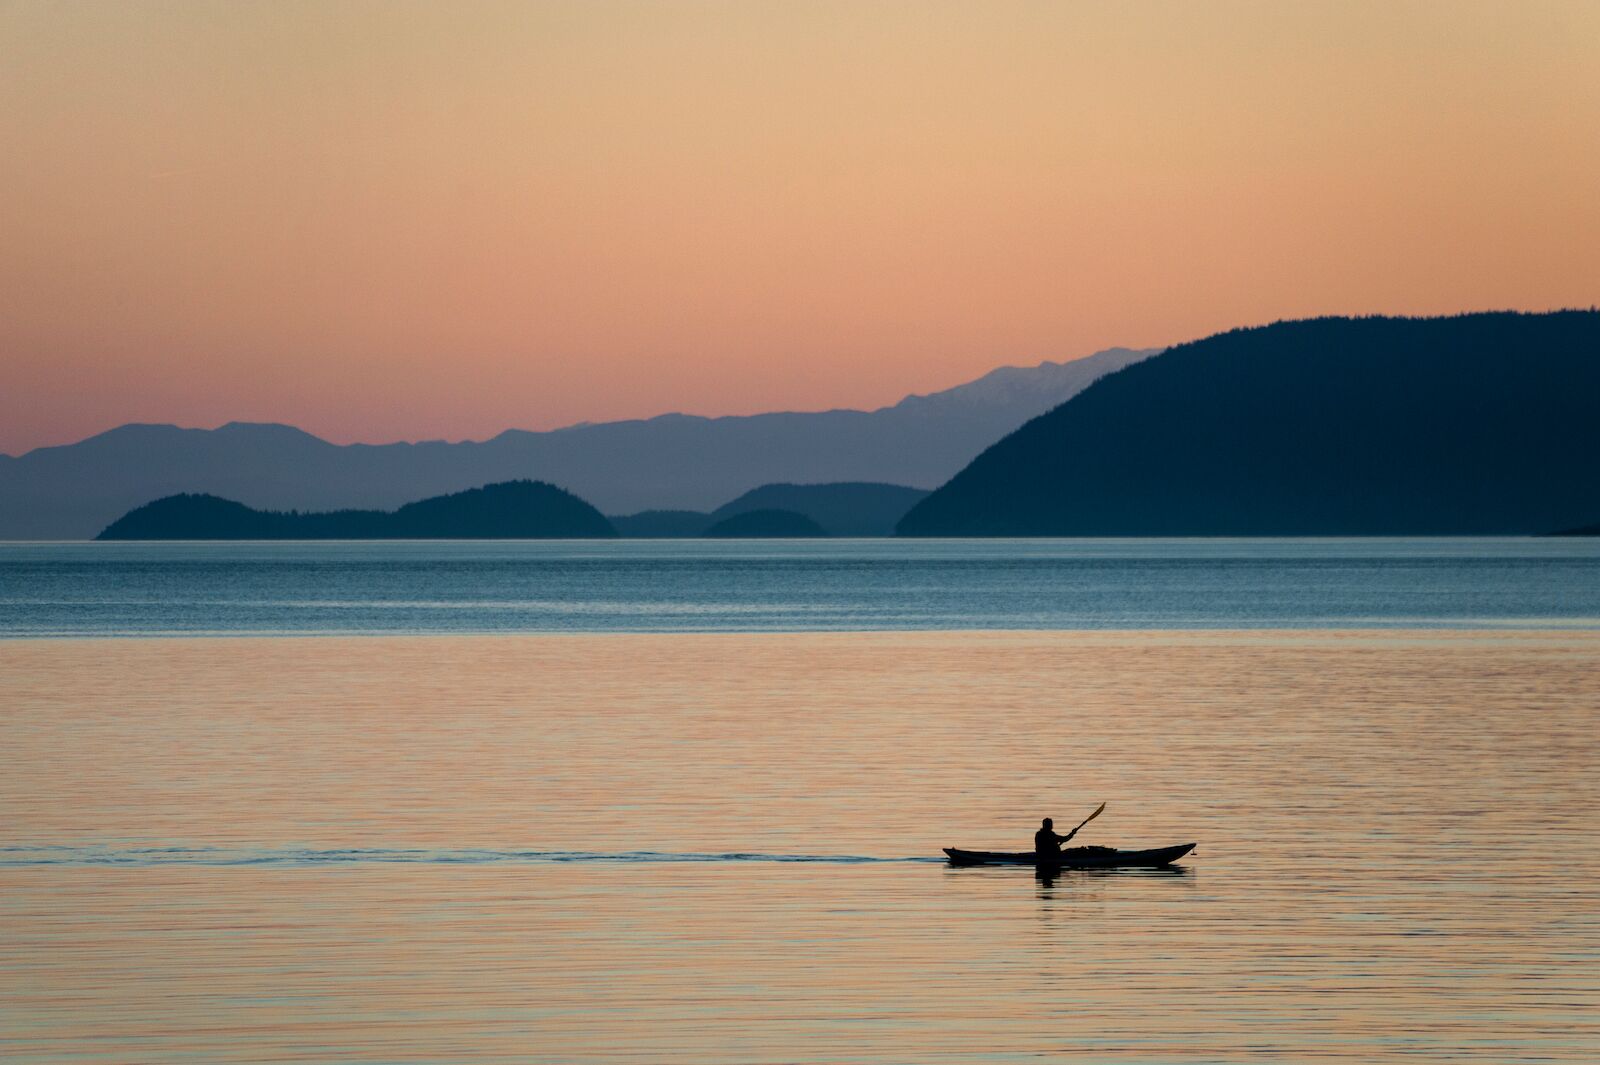 How To Make the Most of an Orcas Island Day Trip From Seattle